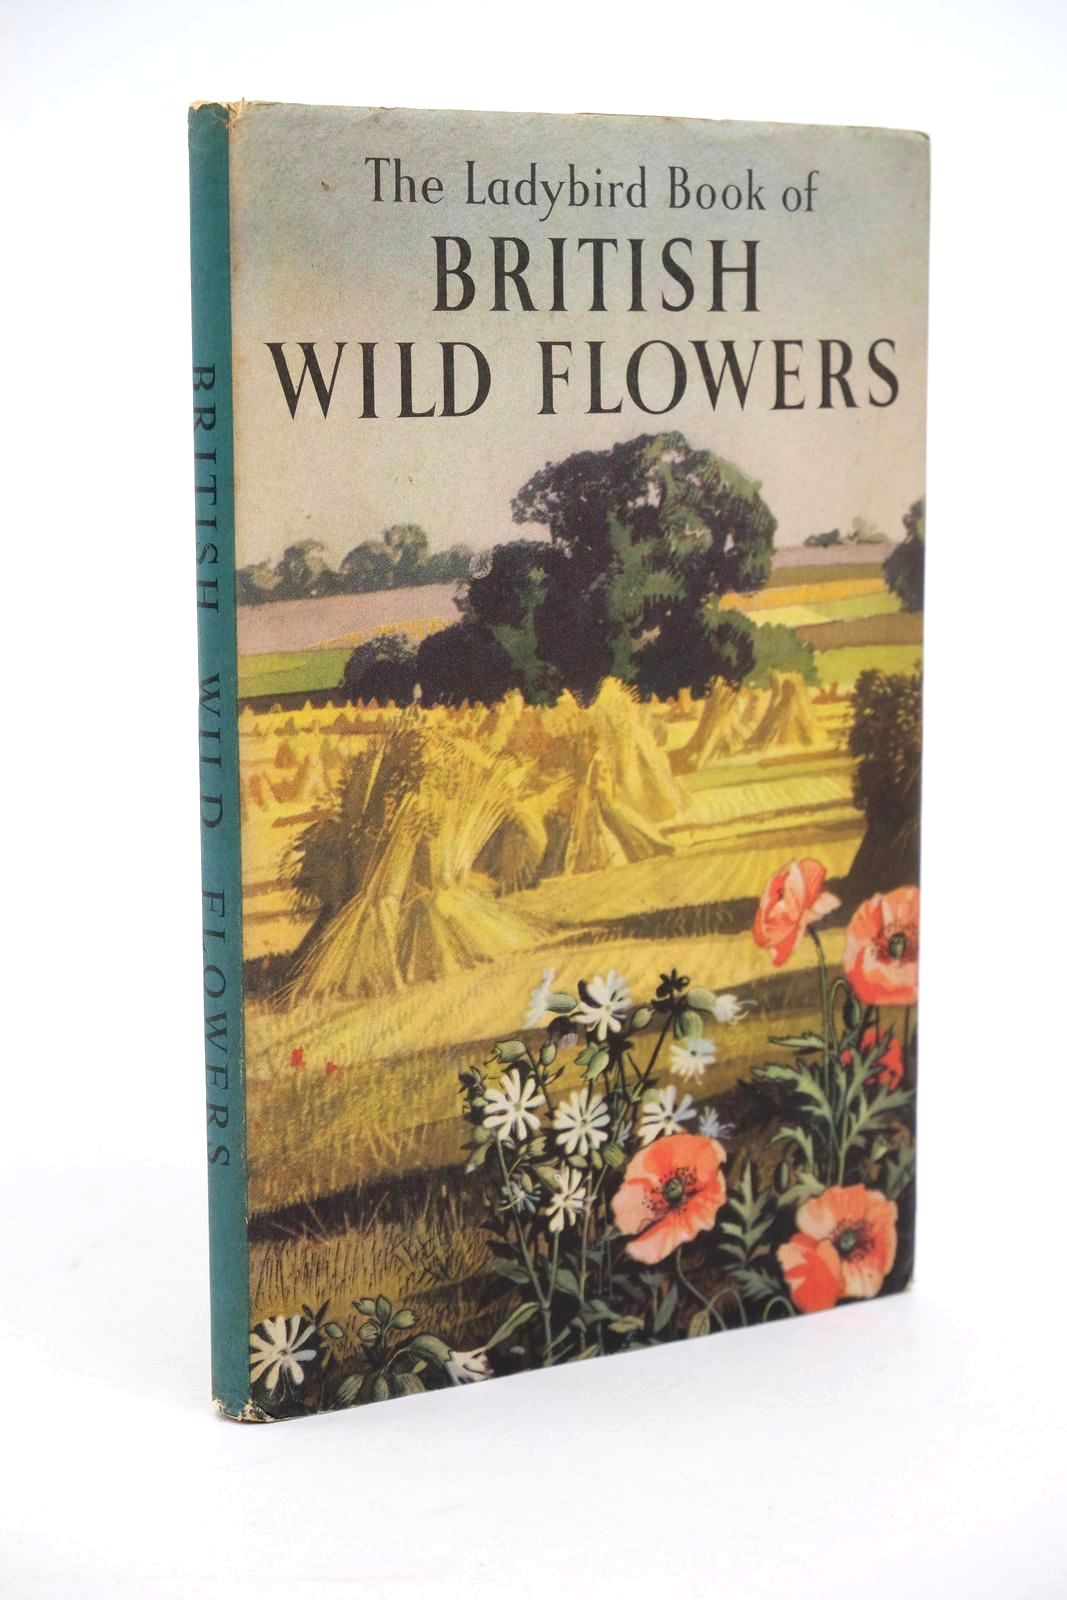 Photo of THE LADYBIRD BOOK OF BRITISH WILD FLOWERS written by Vesey-Fitzgerald, Brian illustrated by Hilder, Rowland Hilder, Edith published by Wills &amp; Hepworth Ltd. (STOCK CODE: 1323139)  for sale by Stella & Rose's Books